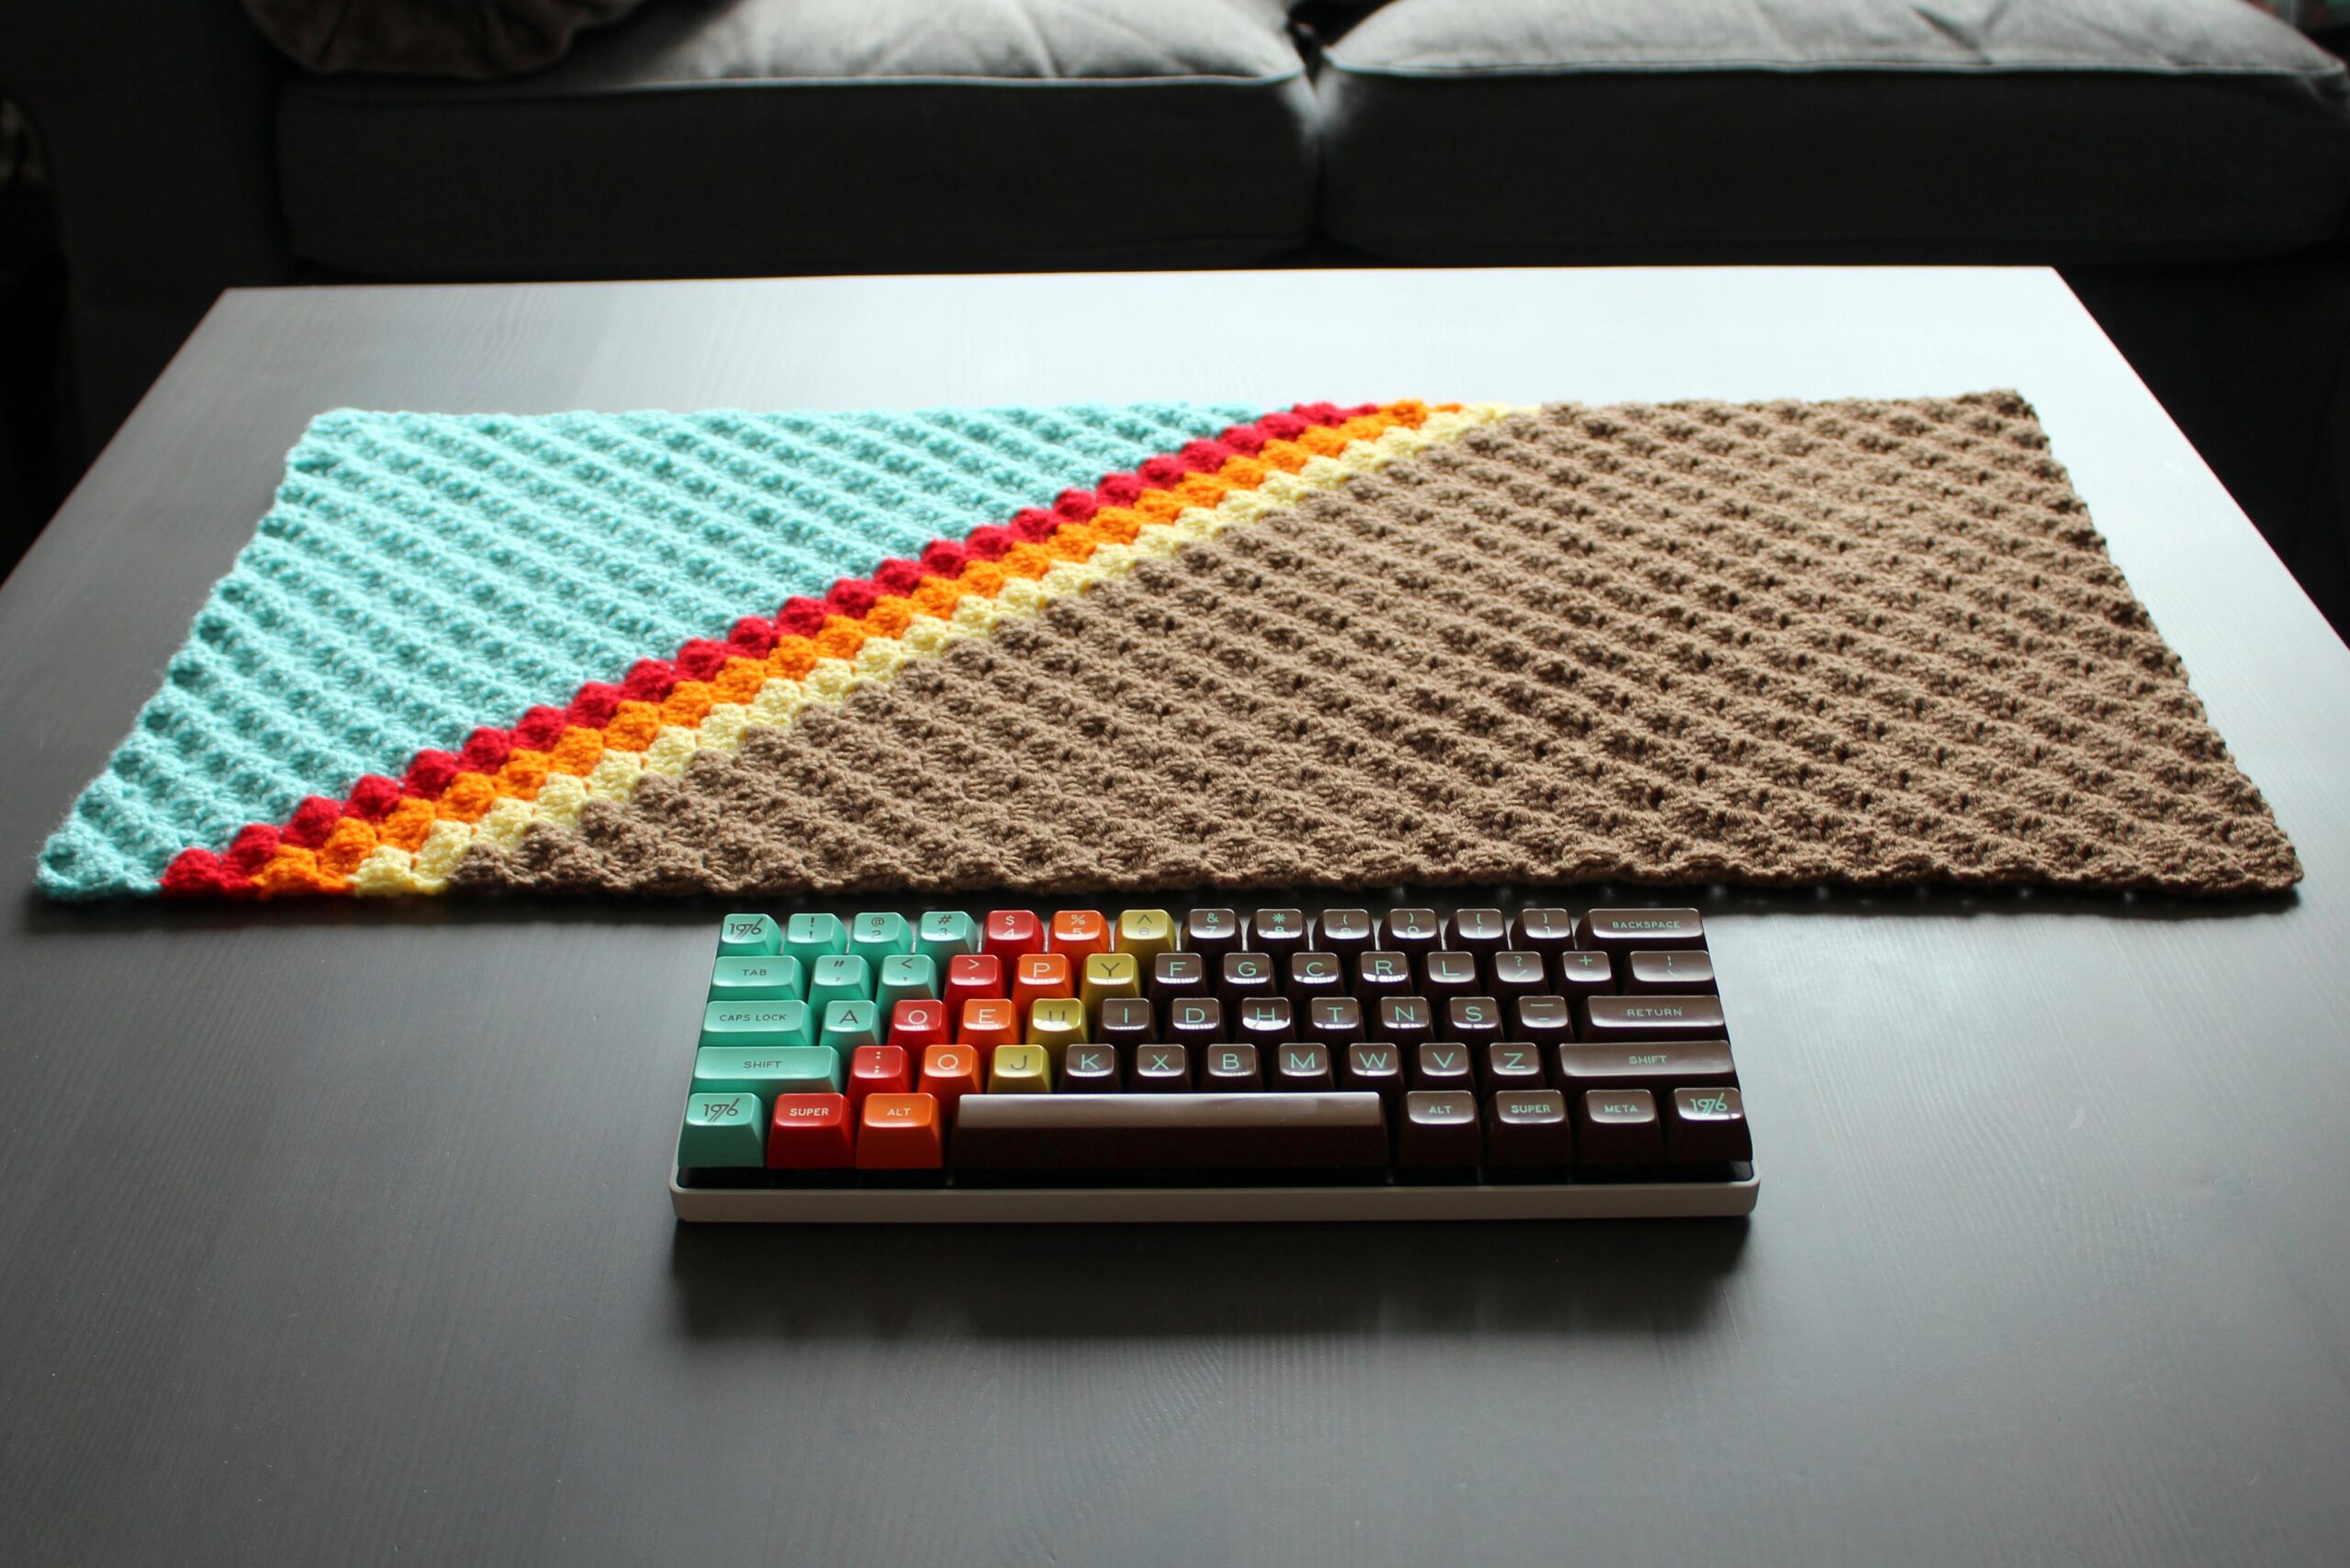 Teal and brown gradient keycaps keyboard on a table with a matching crochet pad